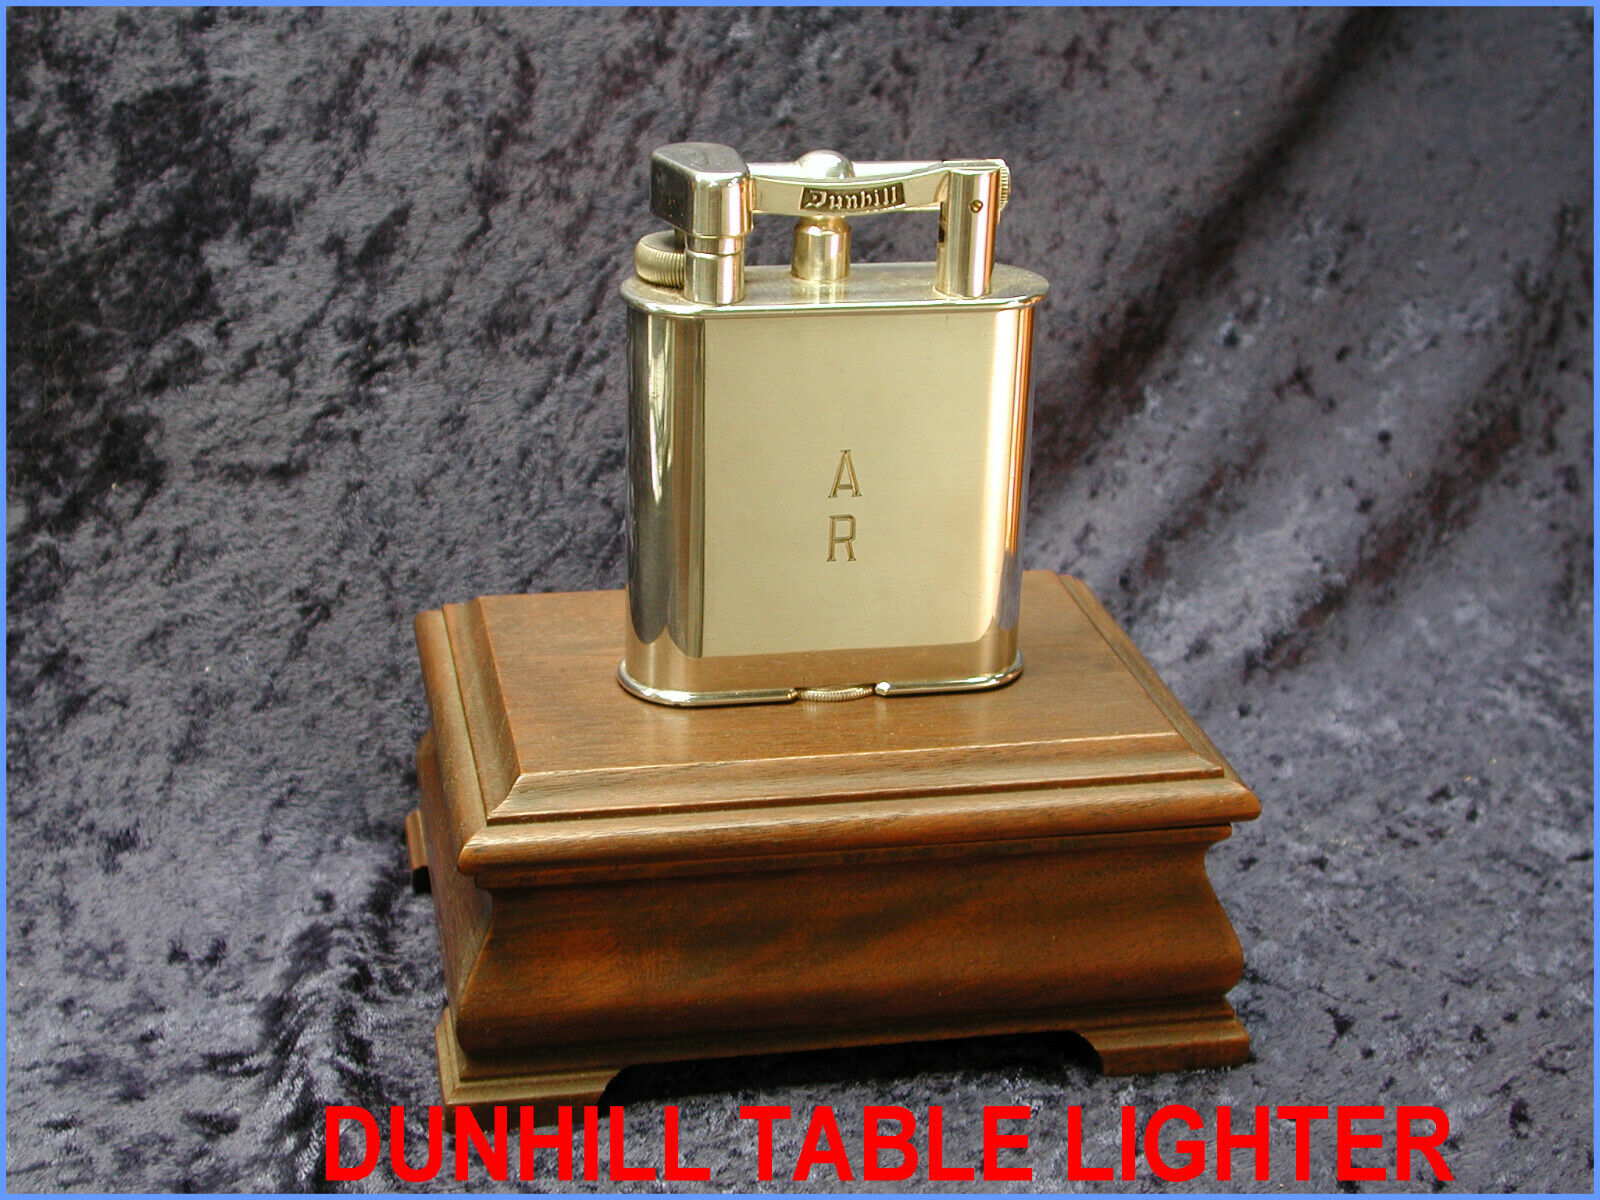 LARGE DUNHILL TABLE LIGHTER  -->>>BEAUTIFUL CONDITION<<<---   silver plated